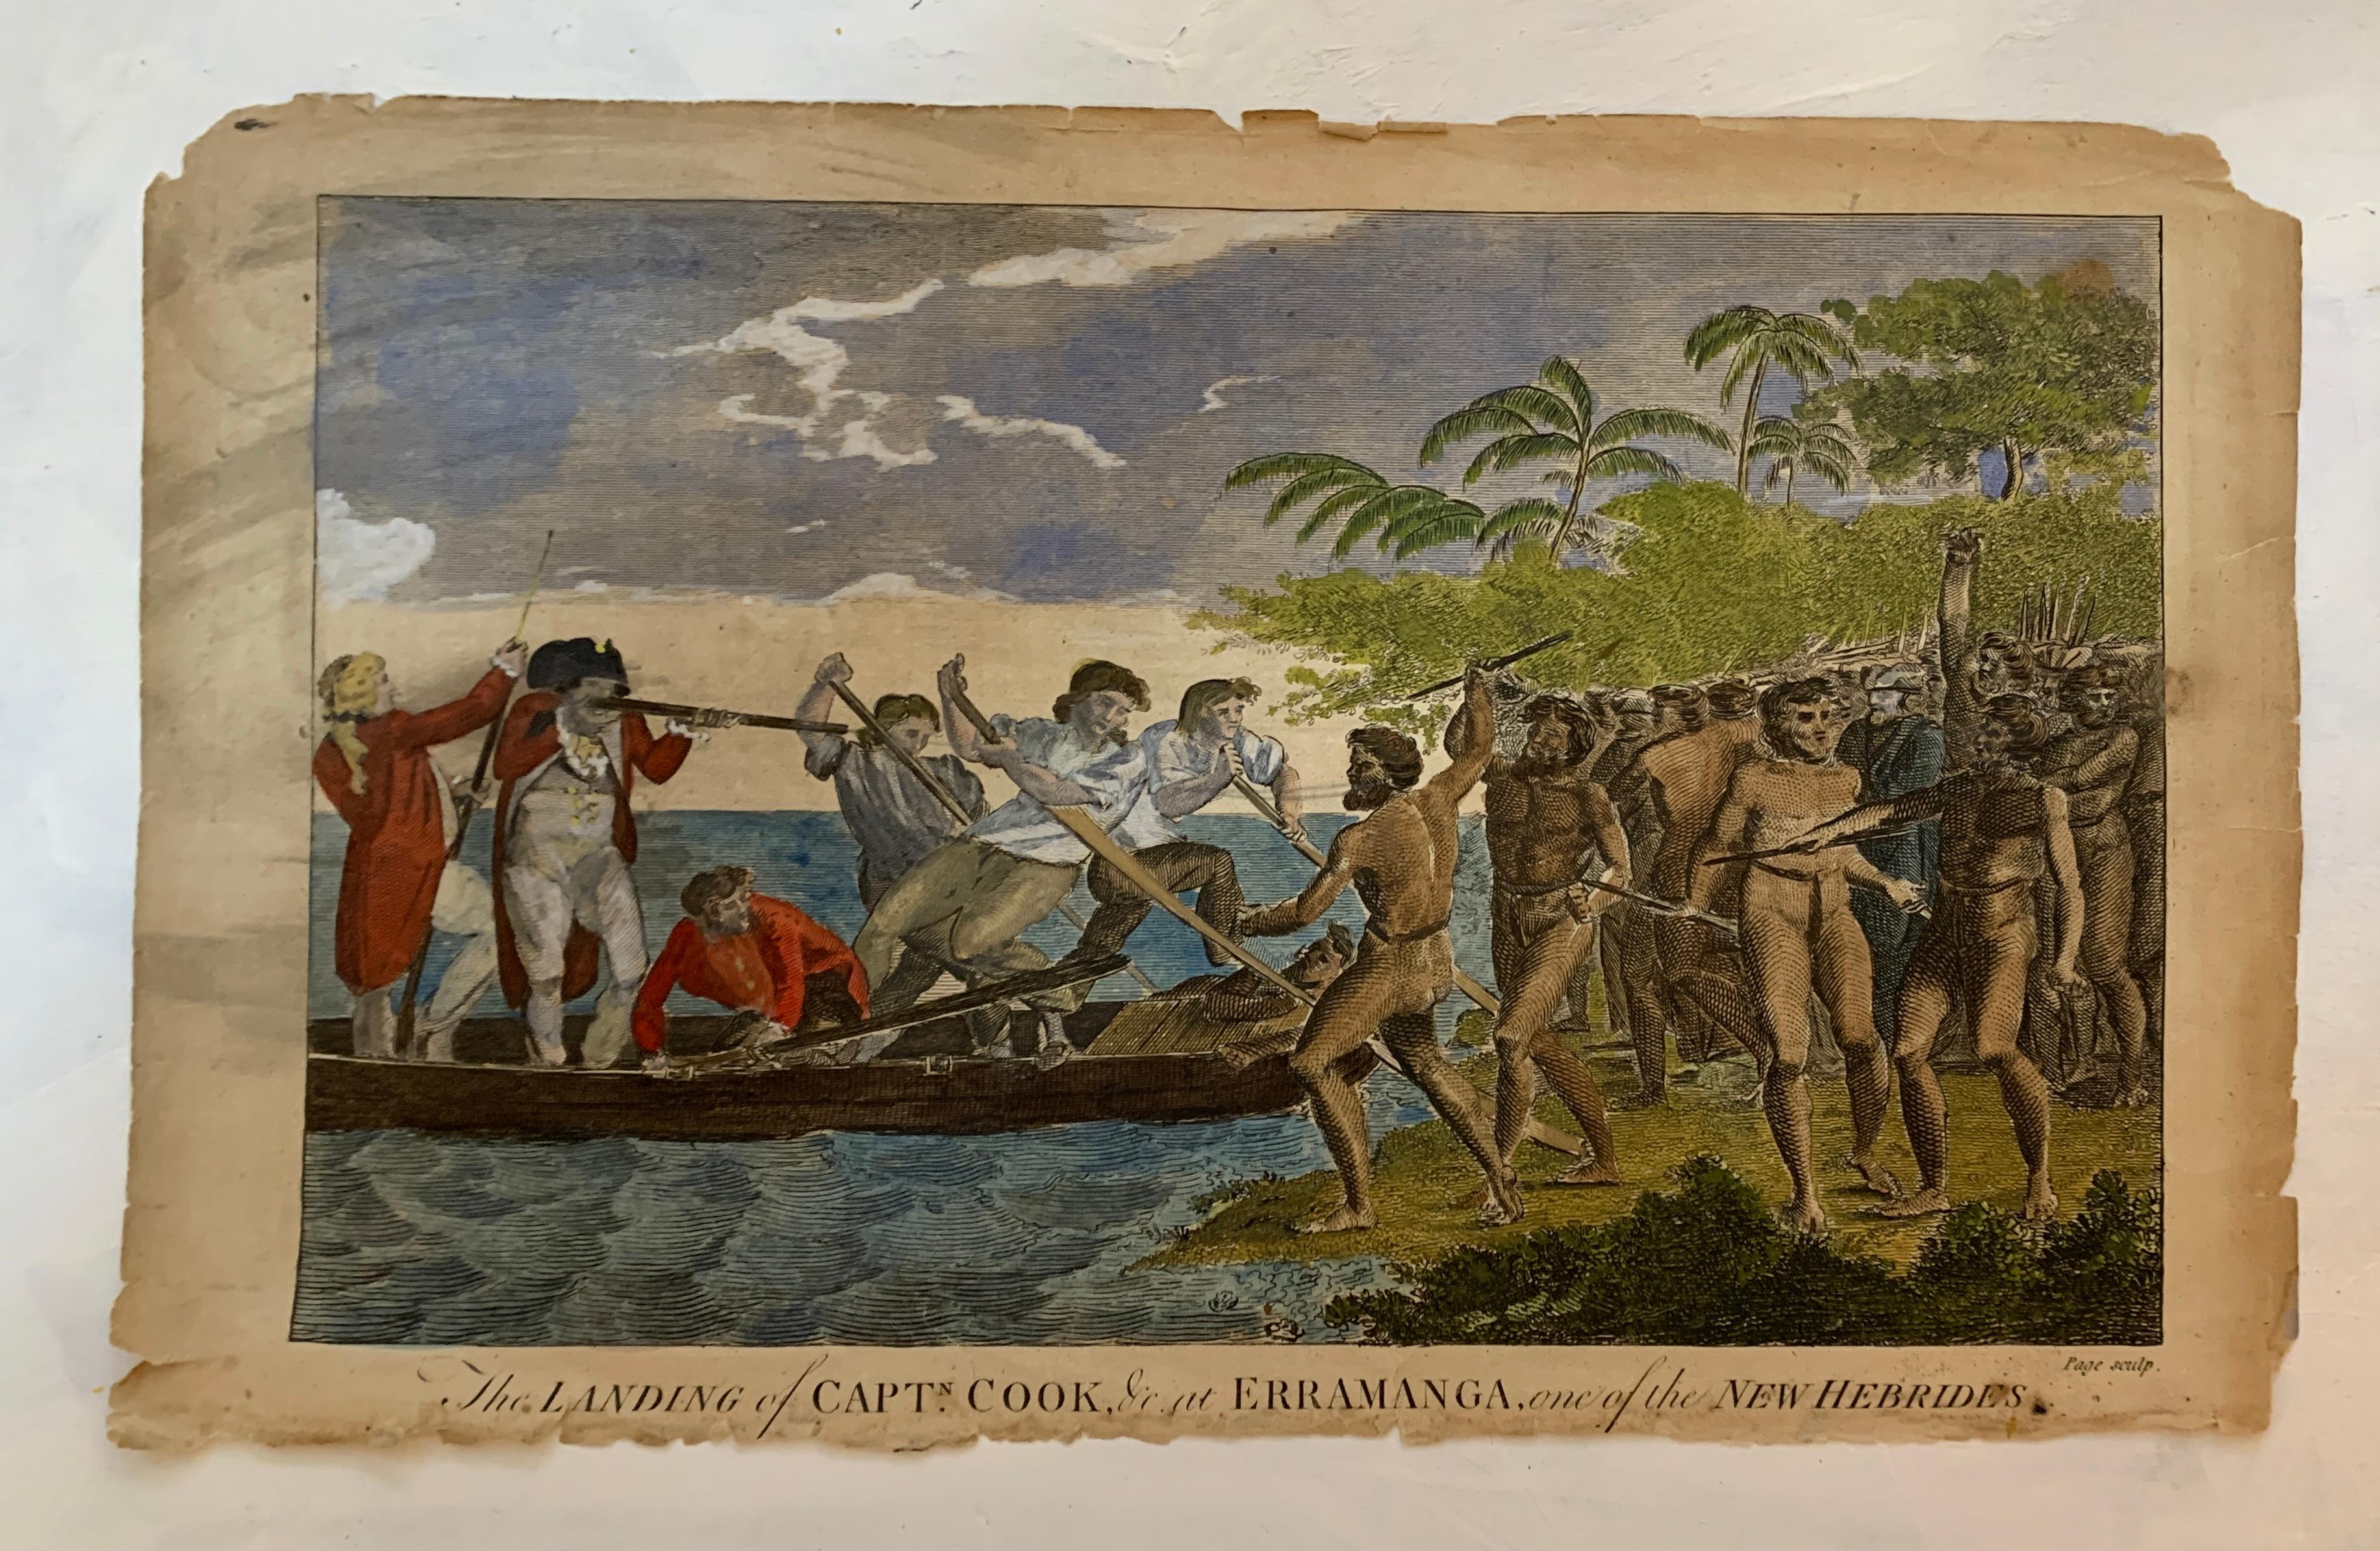 English 18th century of Captain Cook in Mallicolo and Erramanga, New Hebrides - Brown Landscape Print by English school 18th century